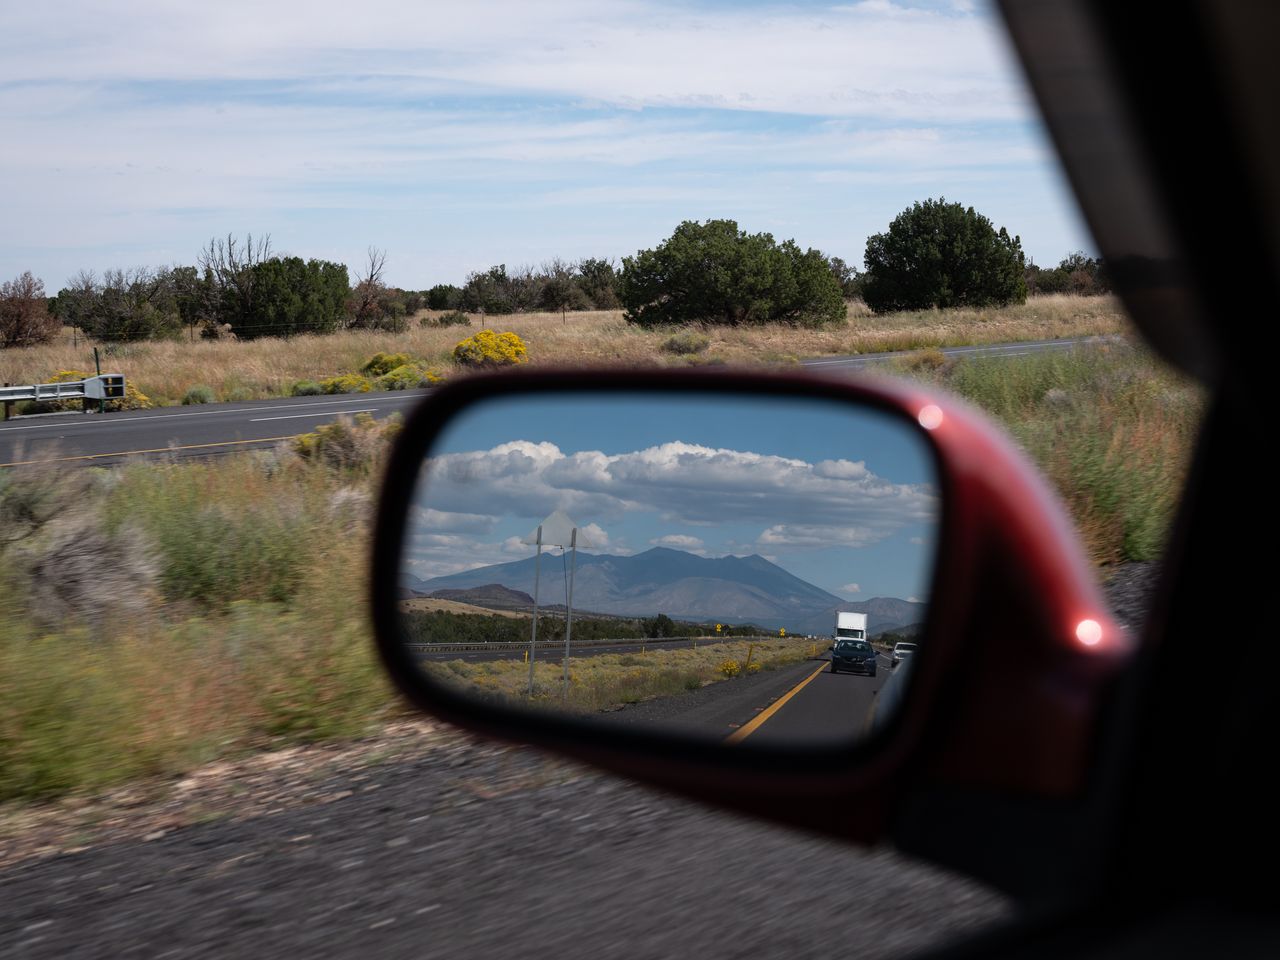 The San Francisco Peaks, mountains sacred to the Diné (Navajo) and other tribes, are reflected in the rearview mirror while traveling east from Flagstaff, Arizona, on Sept. 29, 2022.